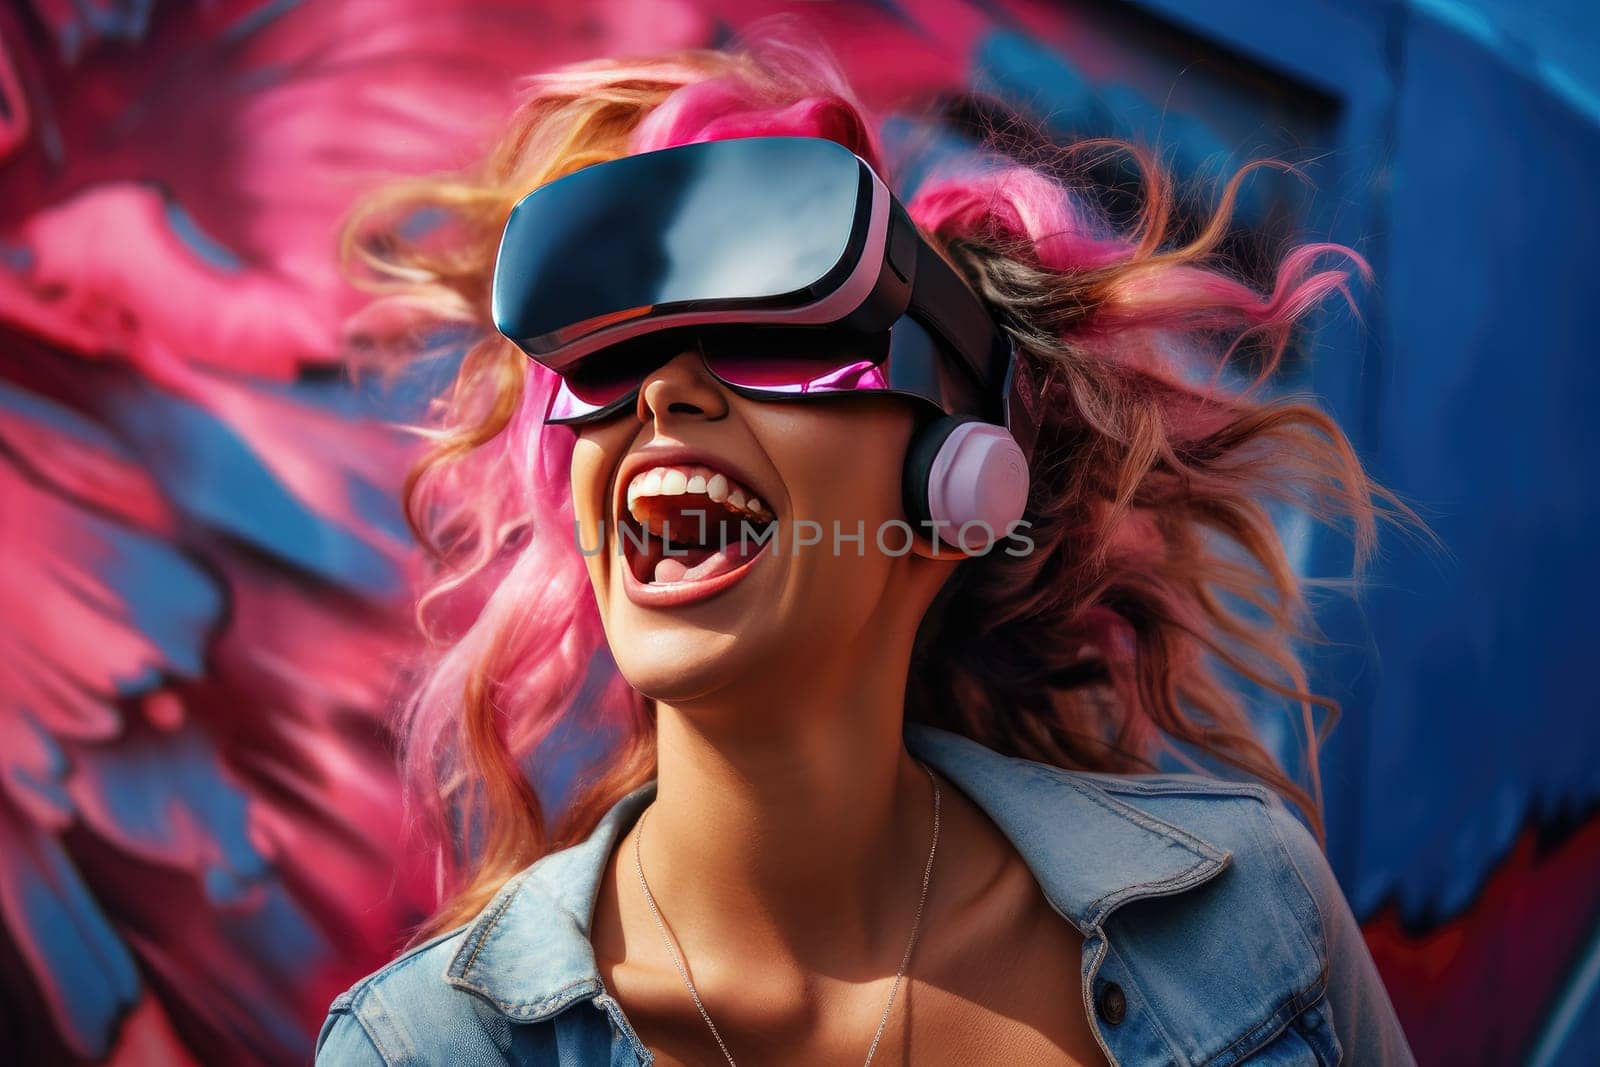 Woman wearing a virtual reality headset with electronic amplification, enjoying an immersive digital experience in a modern setting. Concept of advanced technology and digital innovation.